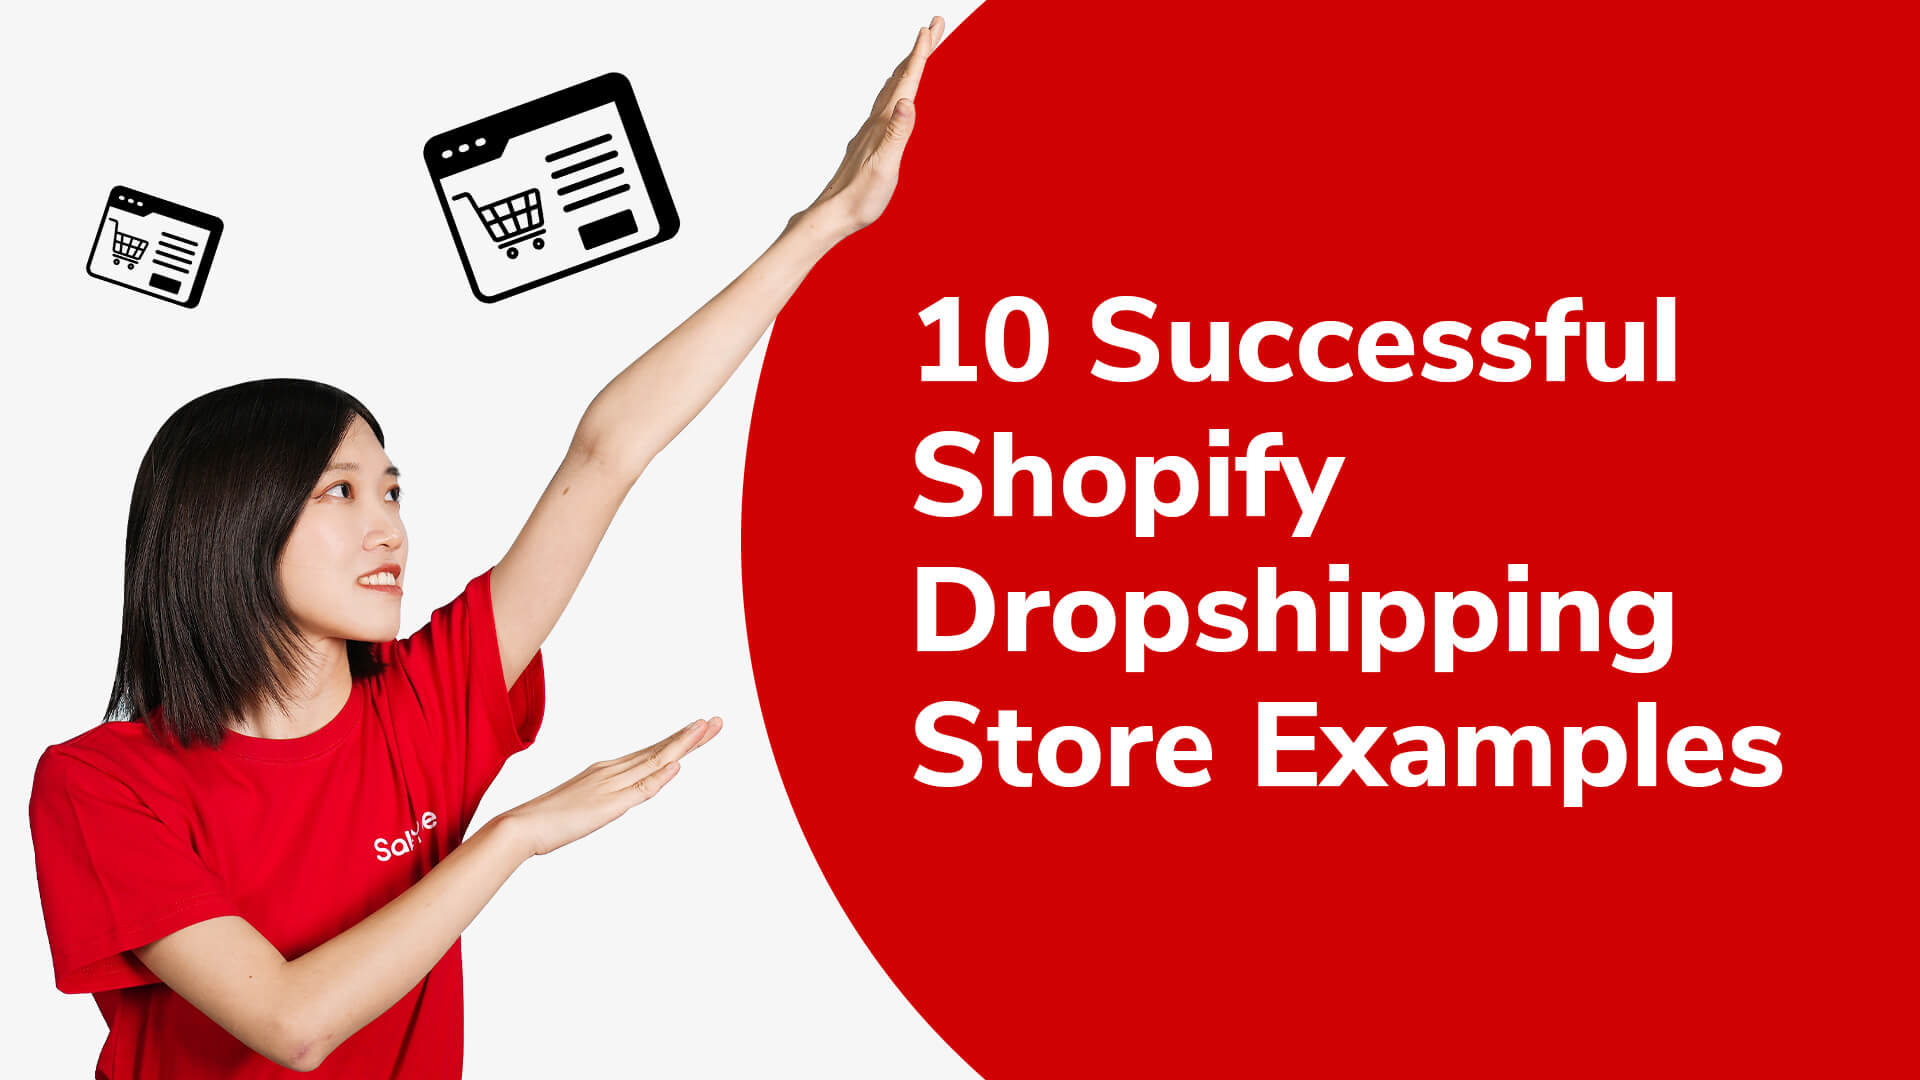 10 Successful Shopify Dropshipping Store Examples